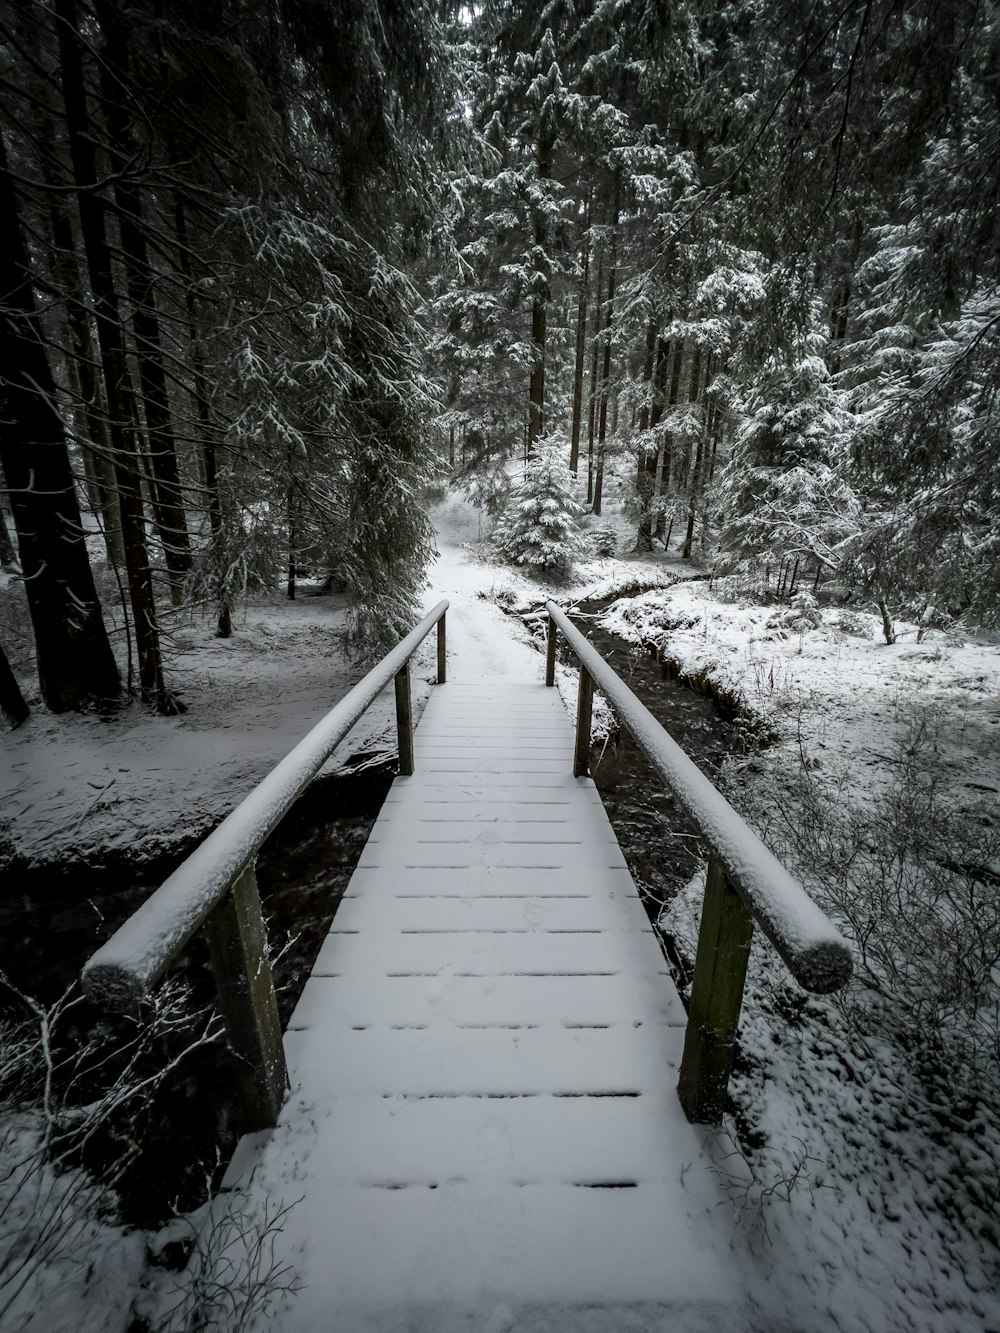 a snow covered path in a forest with trees